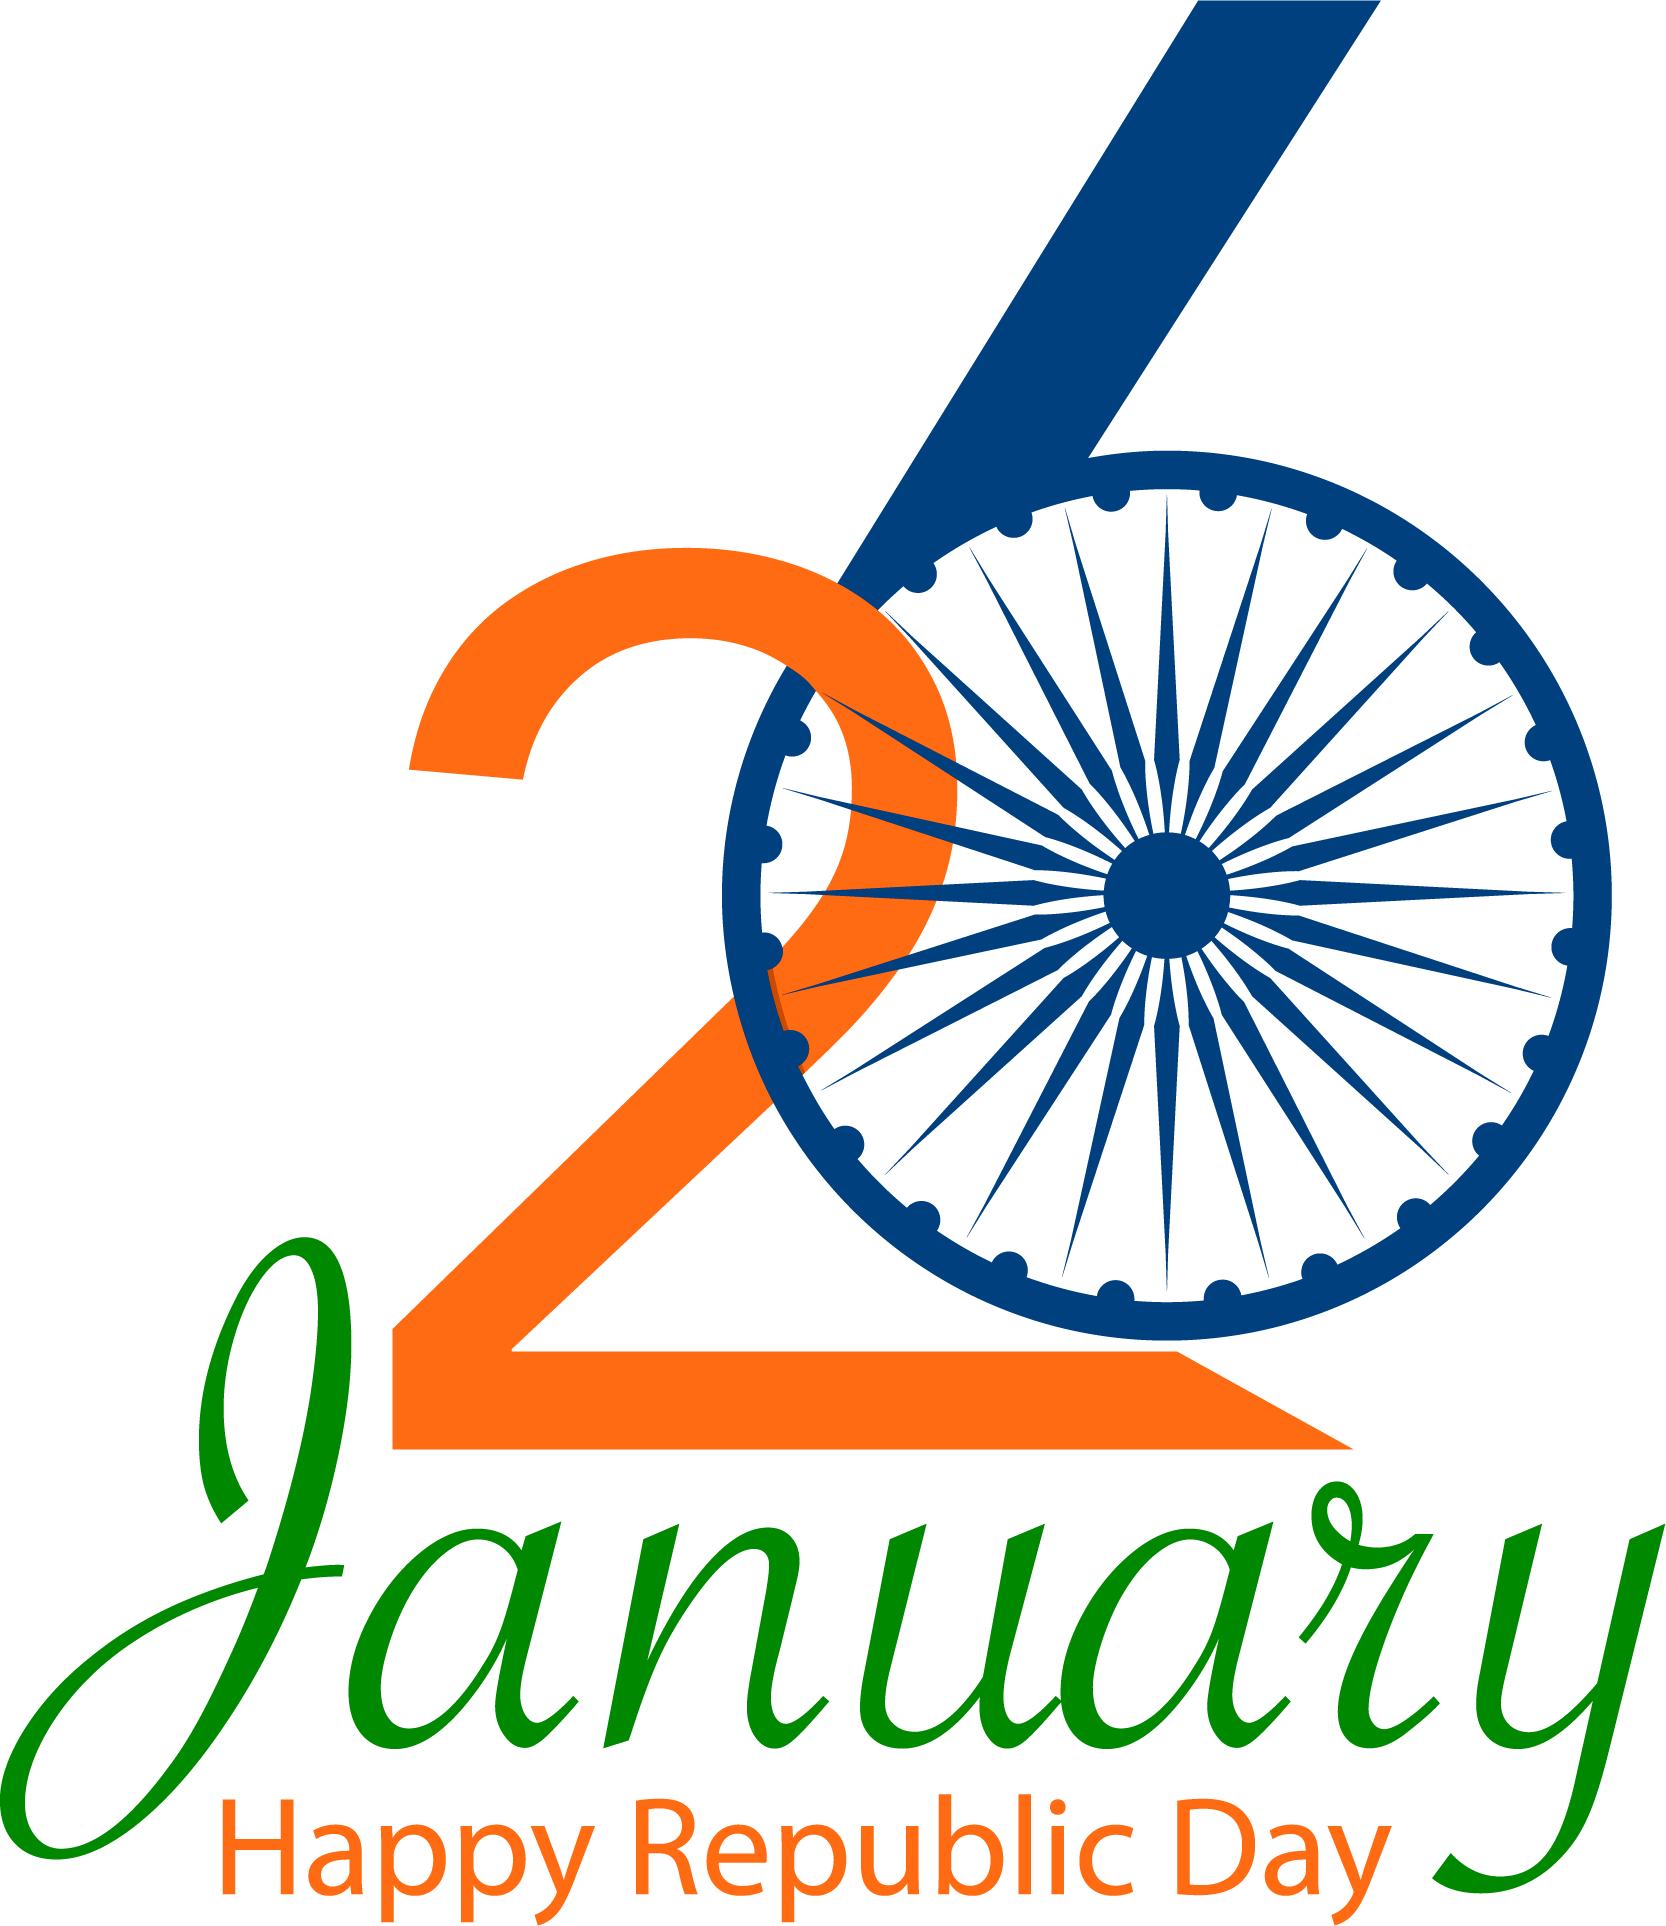 Clipart png image of 26 january republic day - Pngfreepic